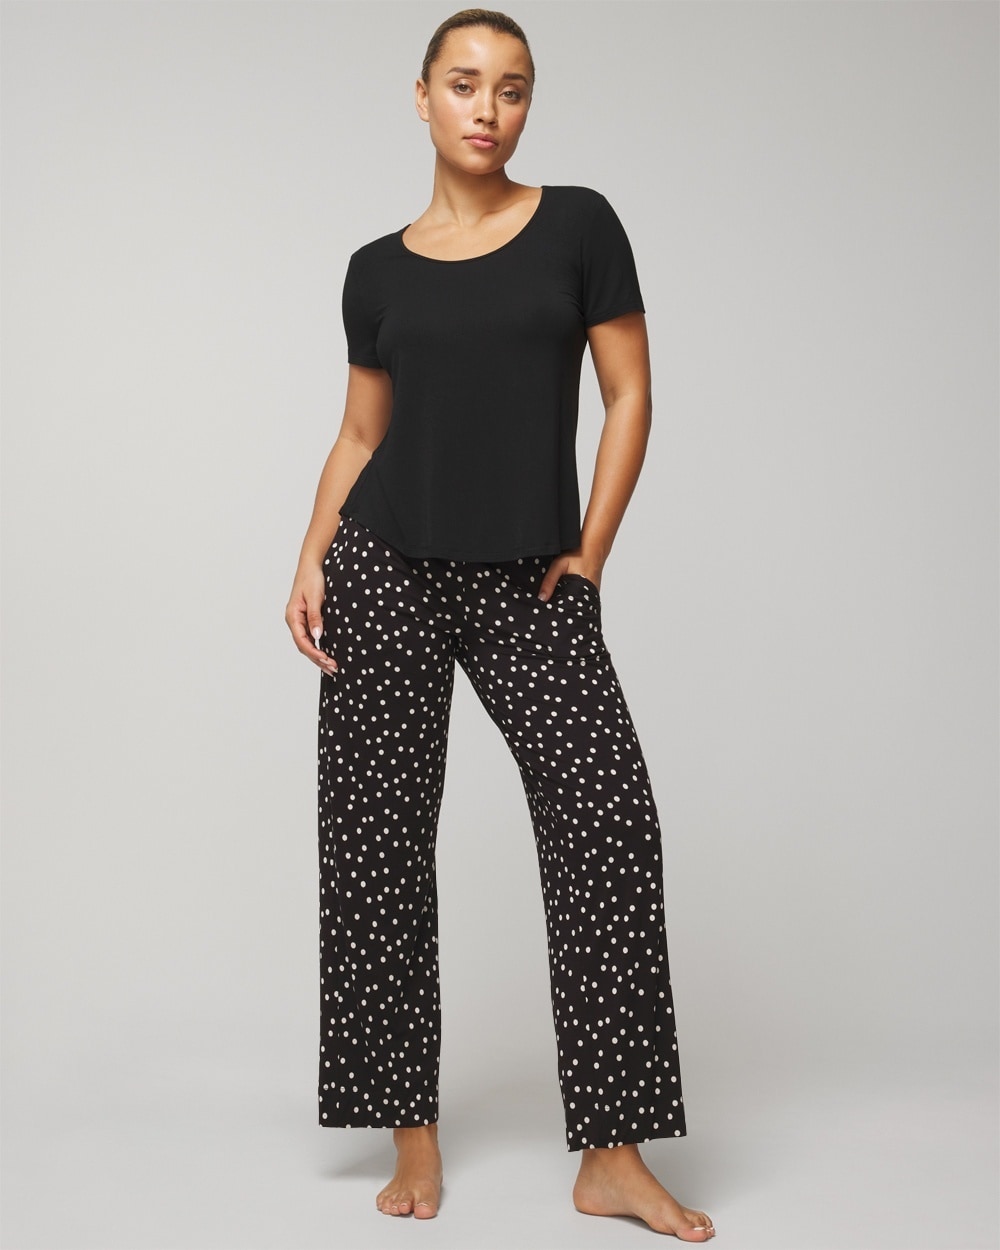 Soma Women's Cool Nights Short Sleeve Sleep Top + Pajama Pants Set In Black Size Small |  In Merry Dot Black/ivory